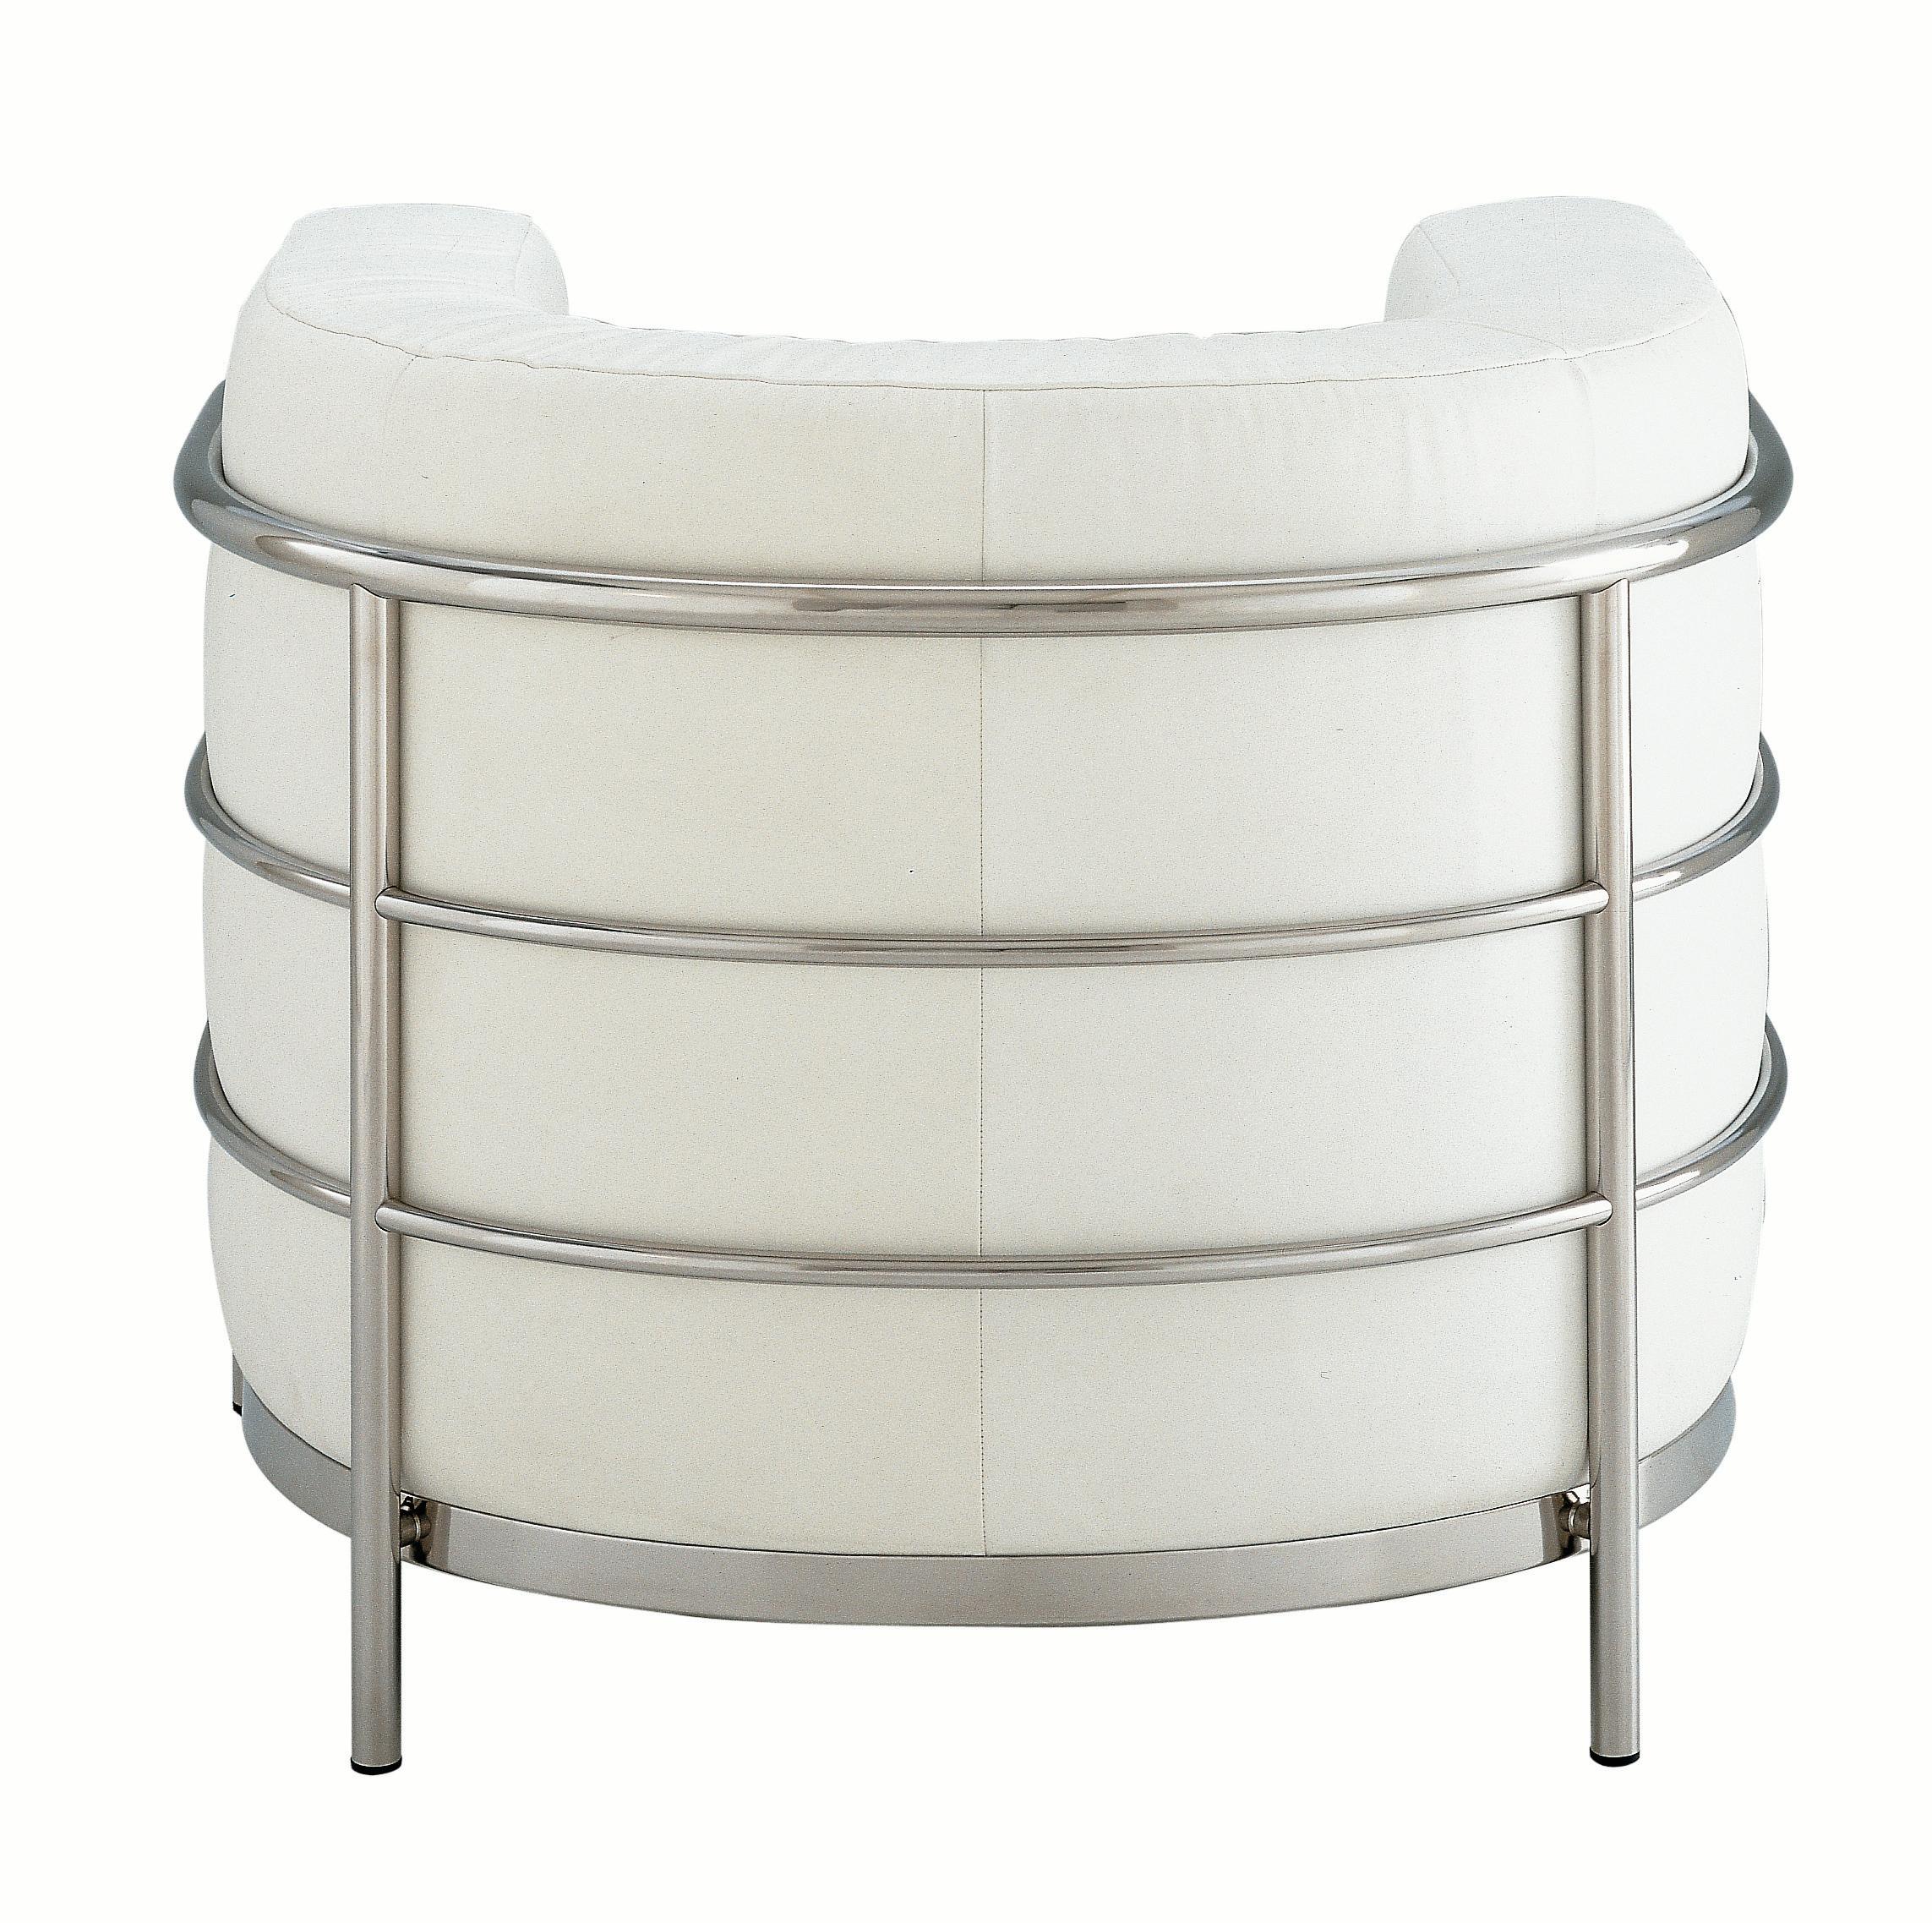 Italian Zanotta Onda Armchair in White Leather with Stainless Steel Tubular Frame For Sale